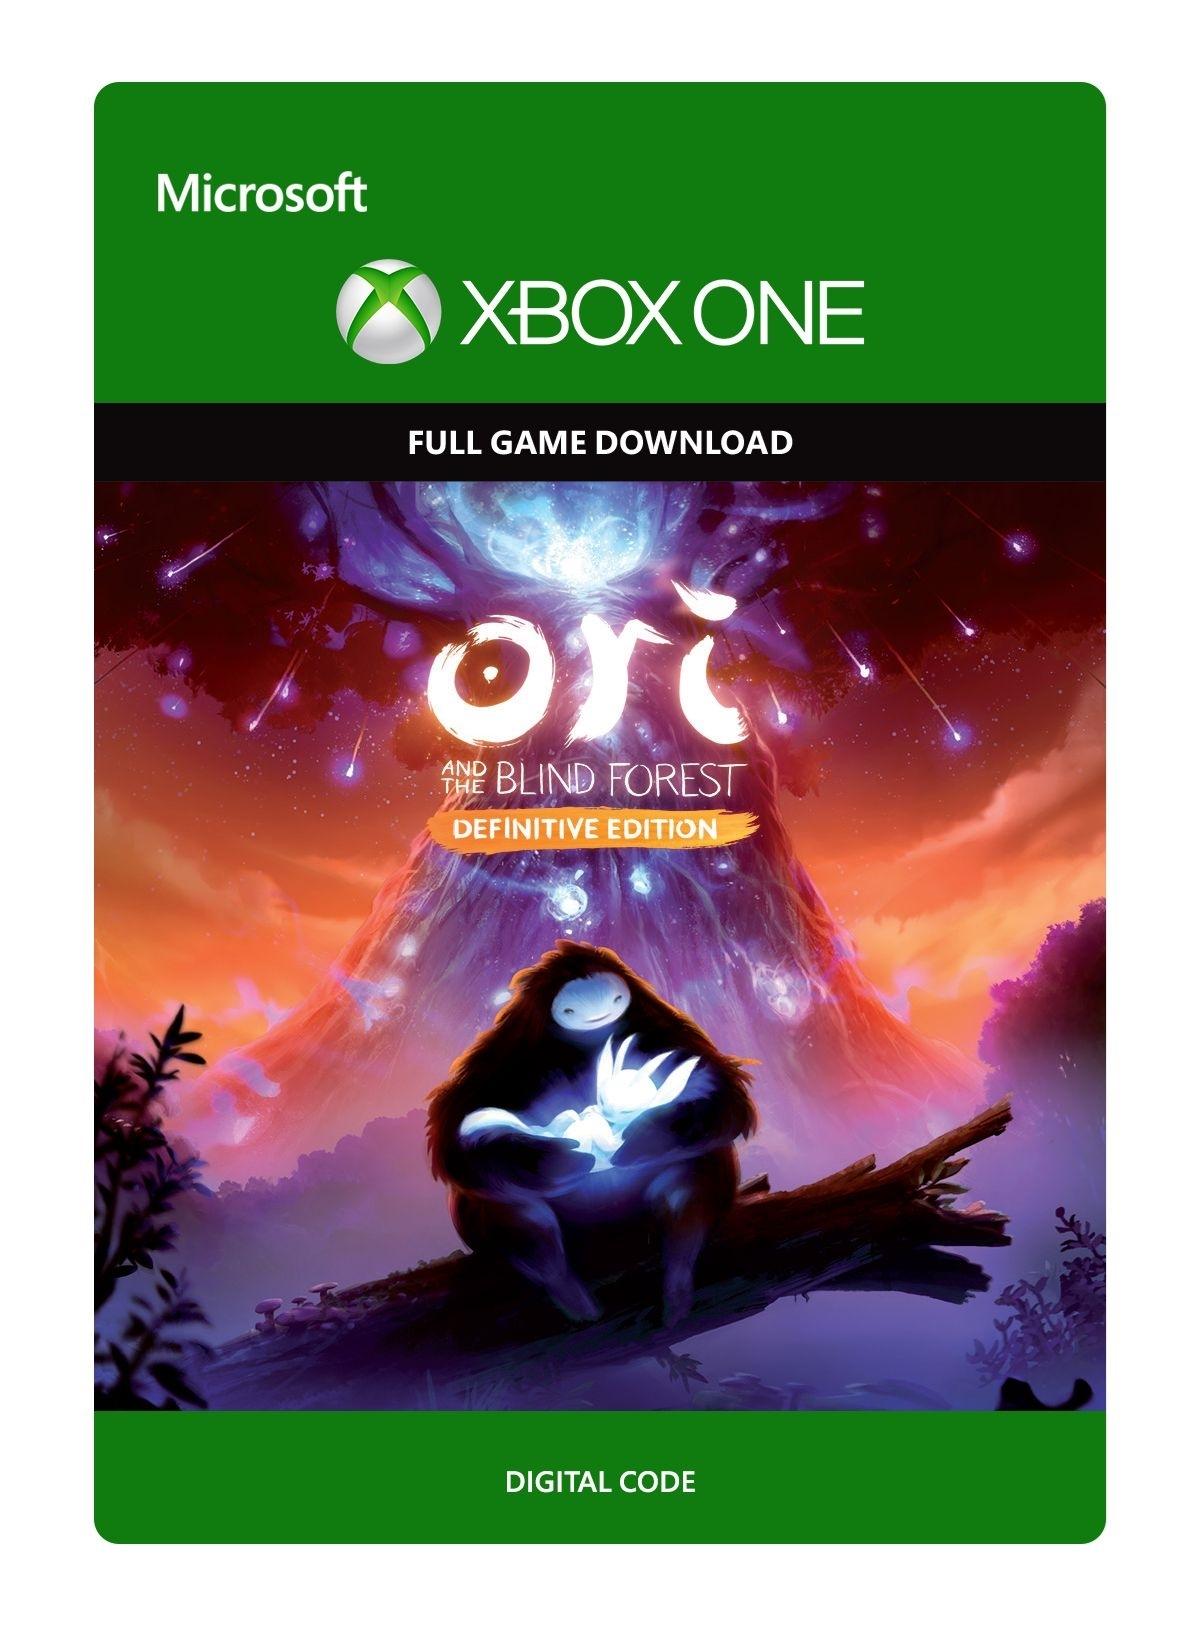 Ori and the Blind Forest: Definitive Edition Xbox One Full Game (Digitale Code) | G7Q-00022 (0364c6c1-231d-49c0-be3a-70128532bb9a)